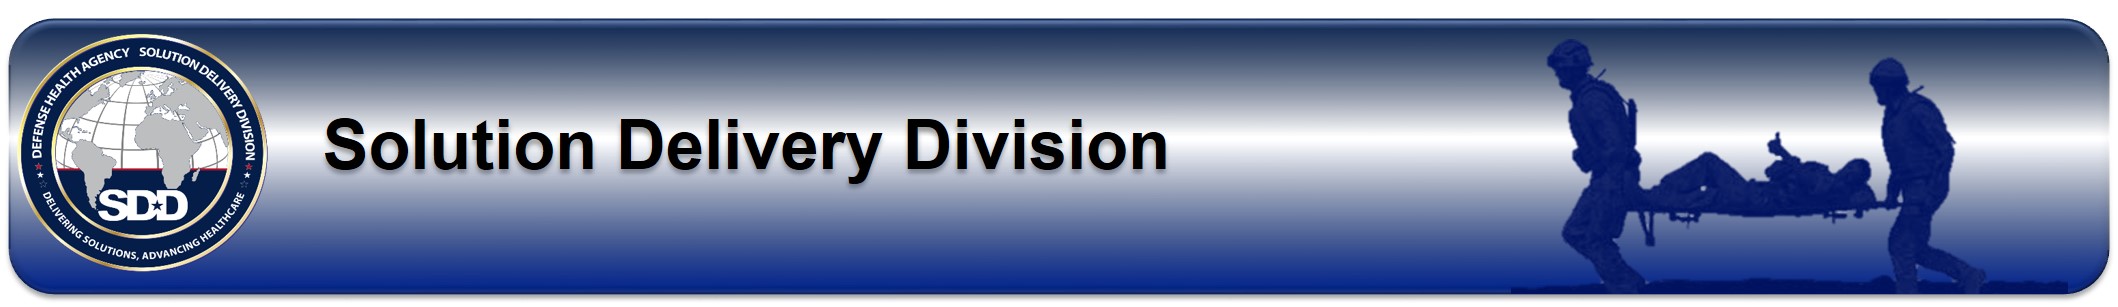 Solution Delivery Division Banner